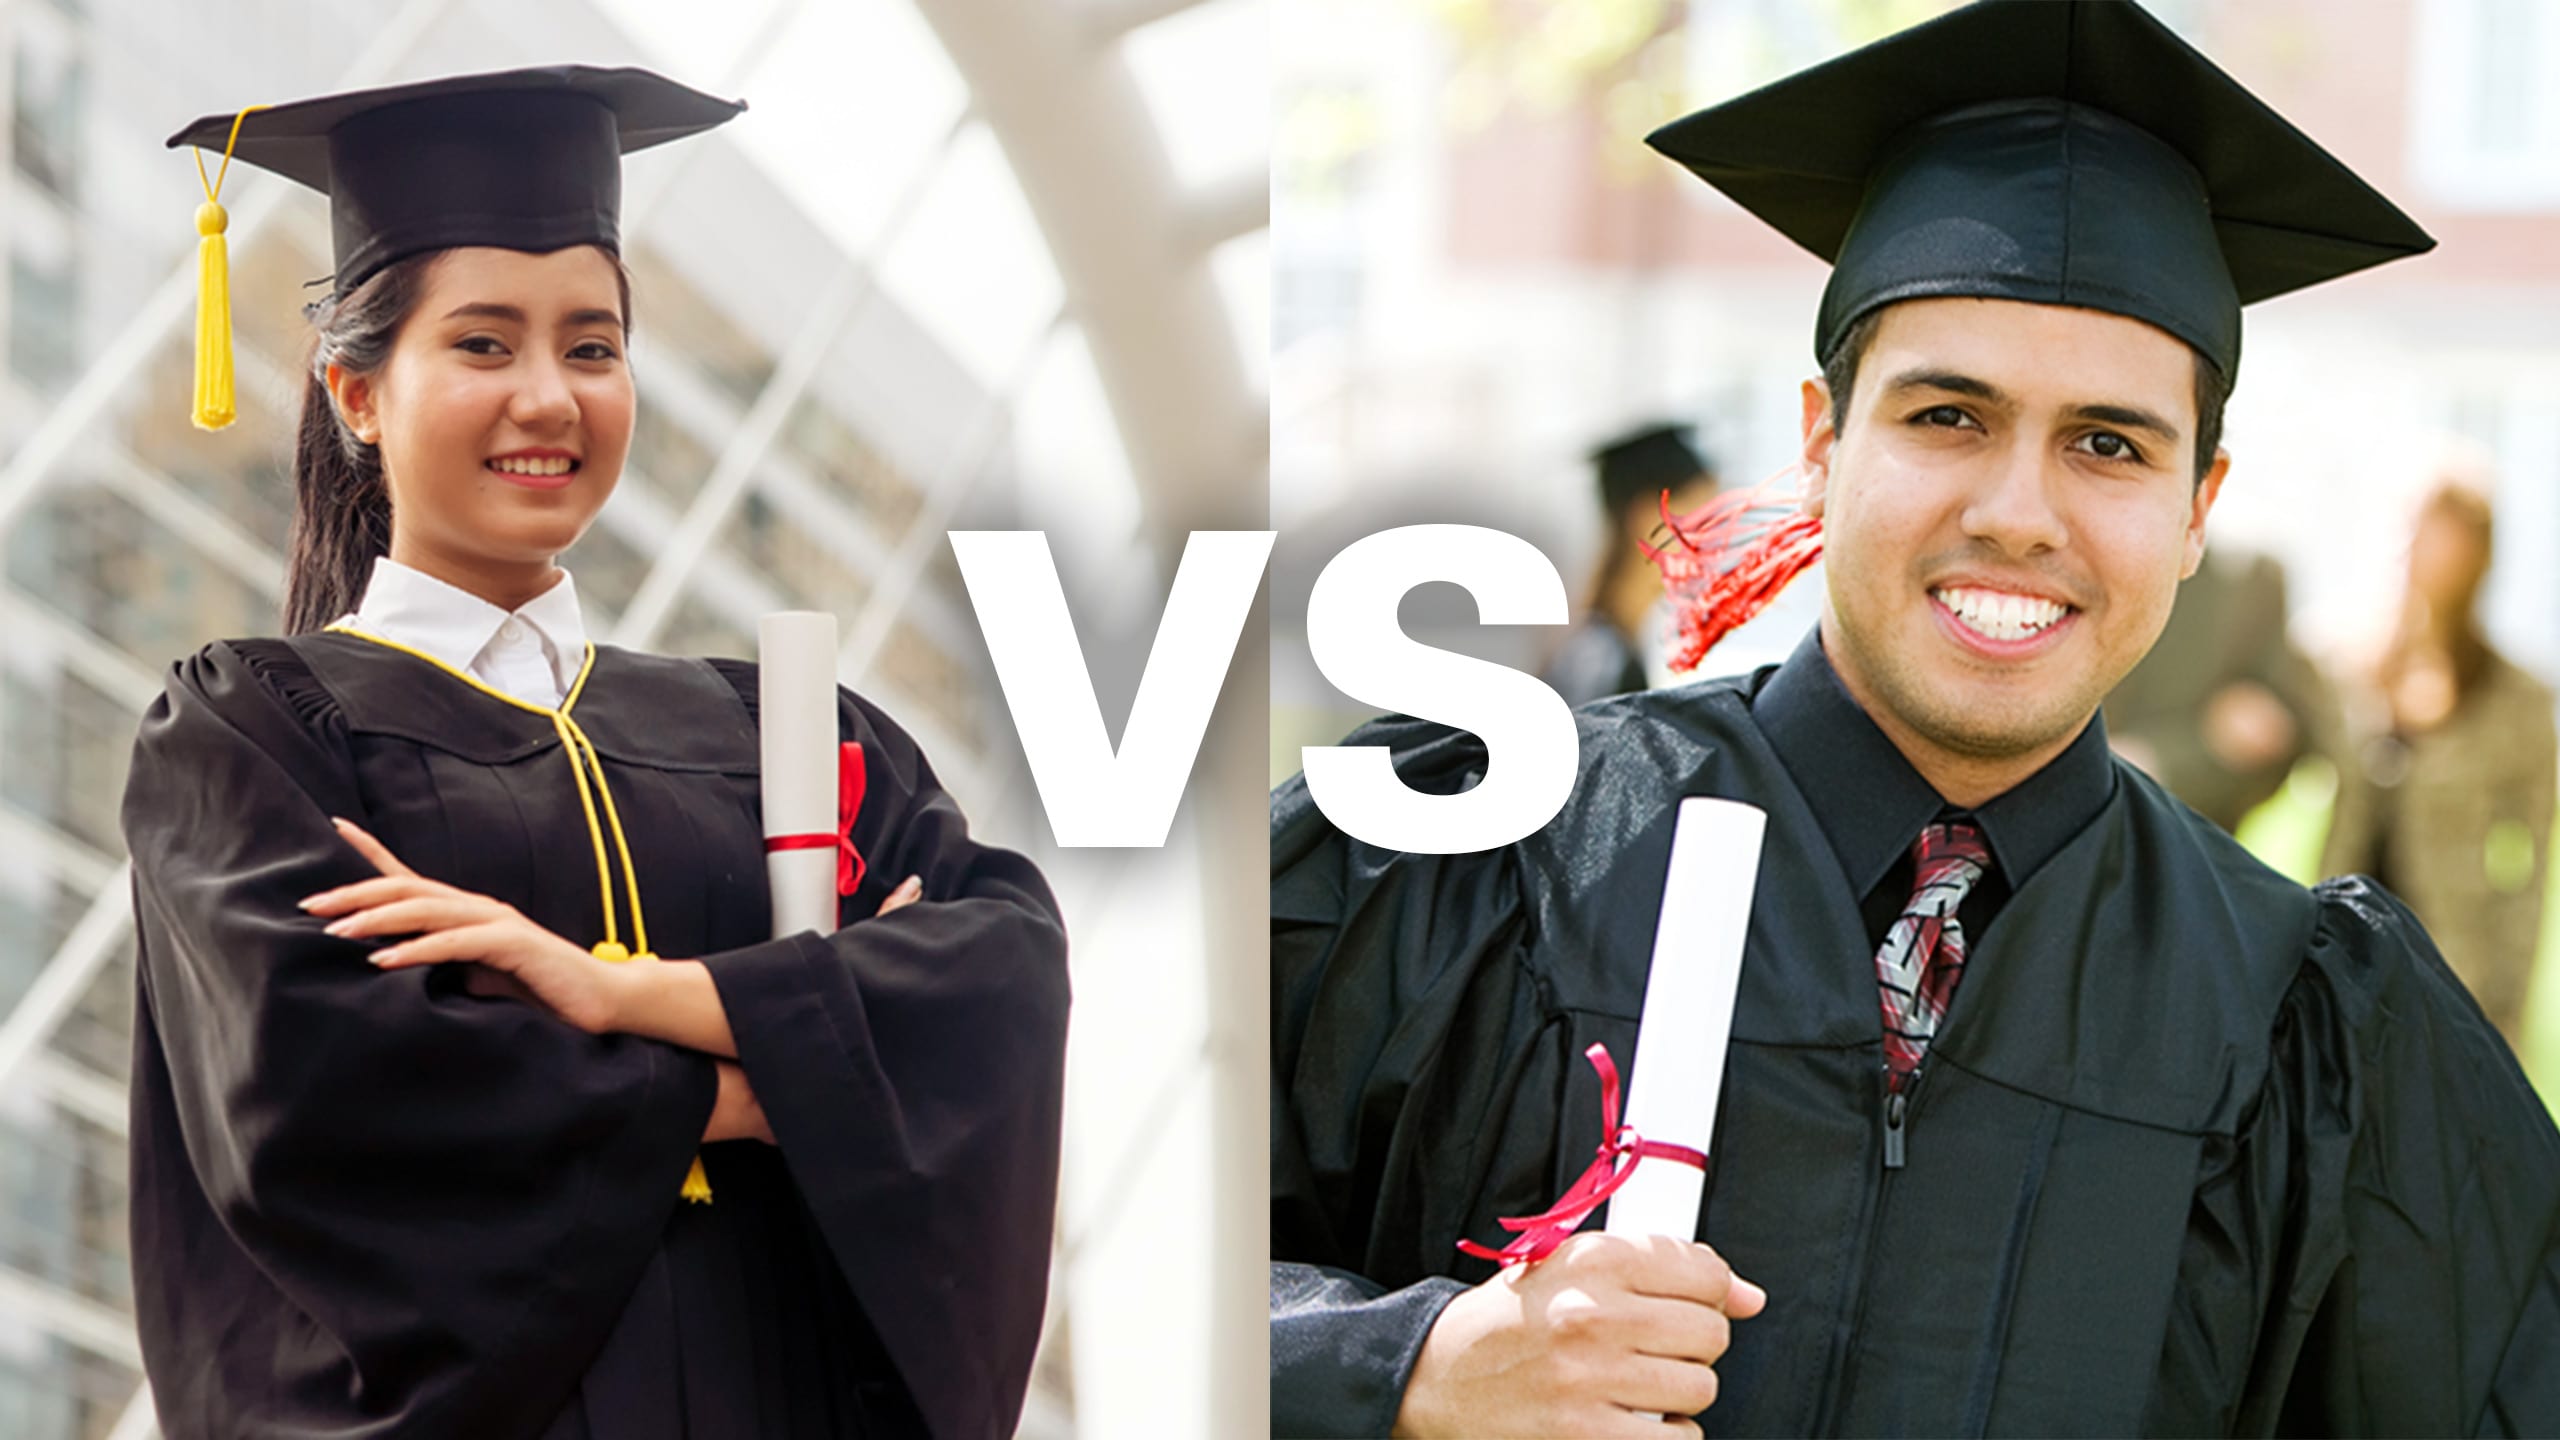 On the left is a female standing with her arms crossed dressed in a graduation cap and gown. On the right is a male holding up his diploma dressed in a graduation cap and gown.